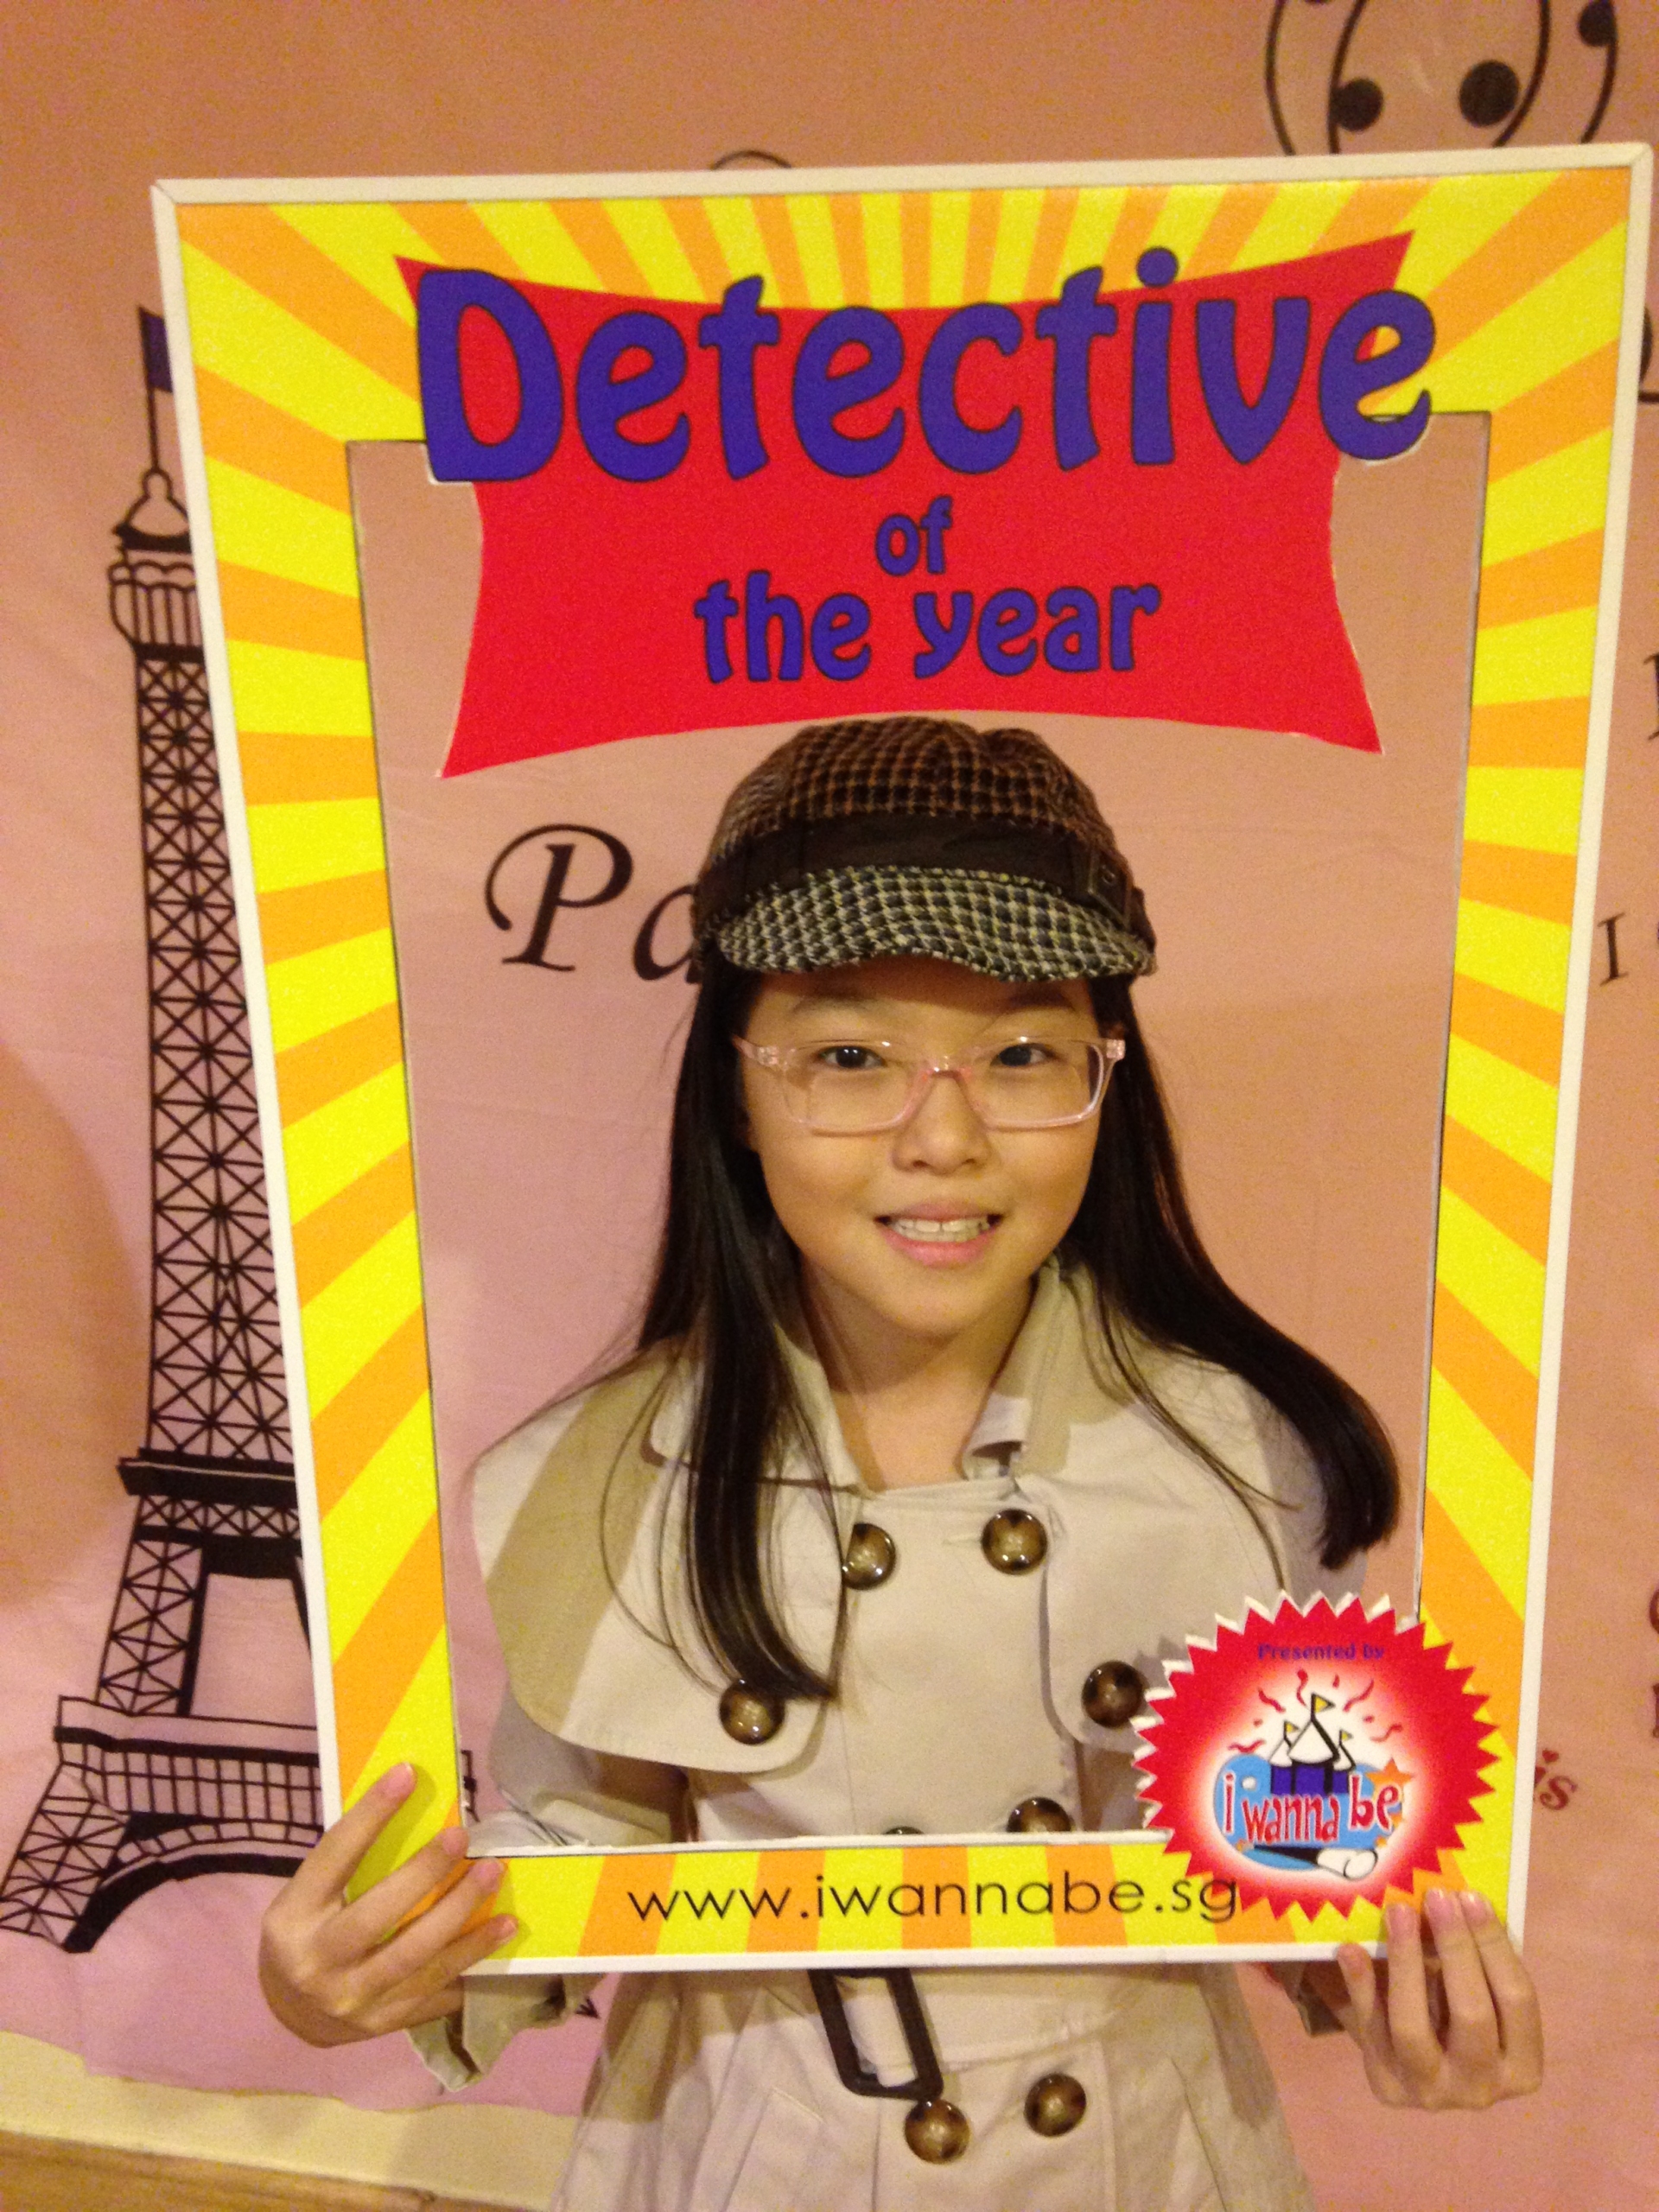 Get your free mugshot in costumes and props with our detective themed party